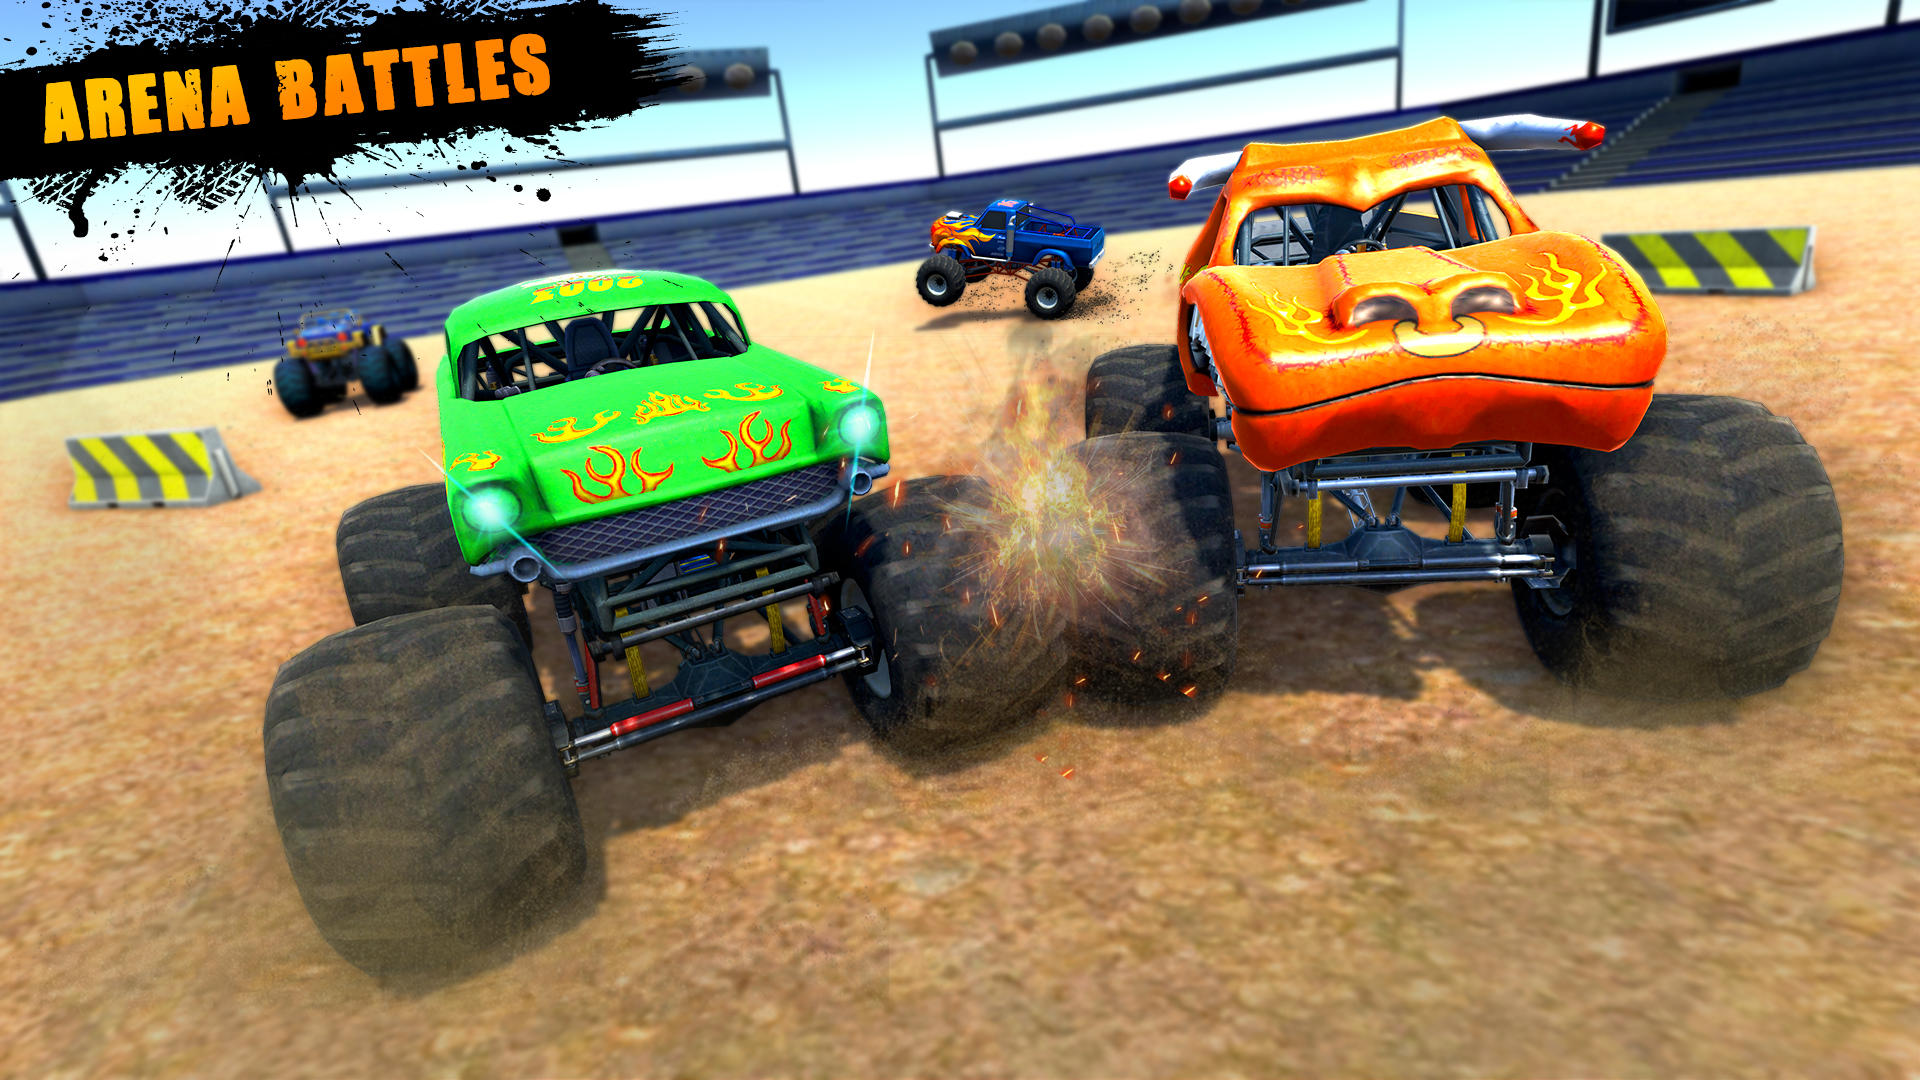 Download do APK de Monster Truck Mad Racing Game para Android